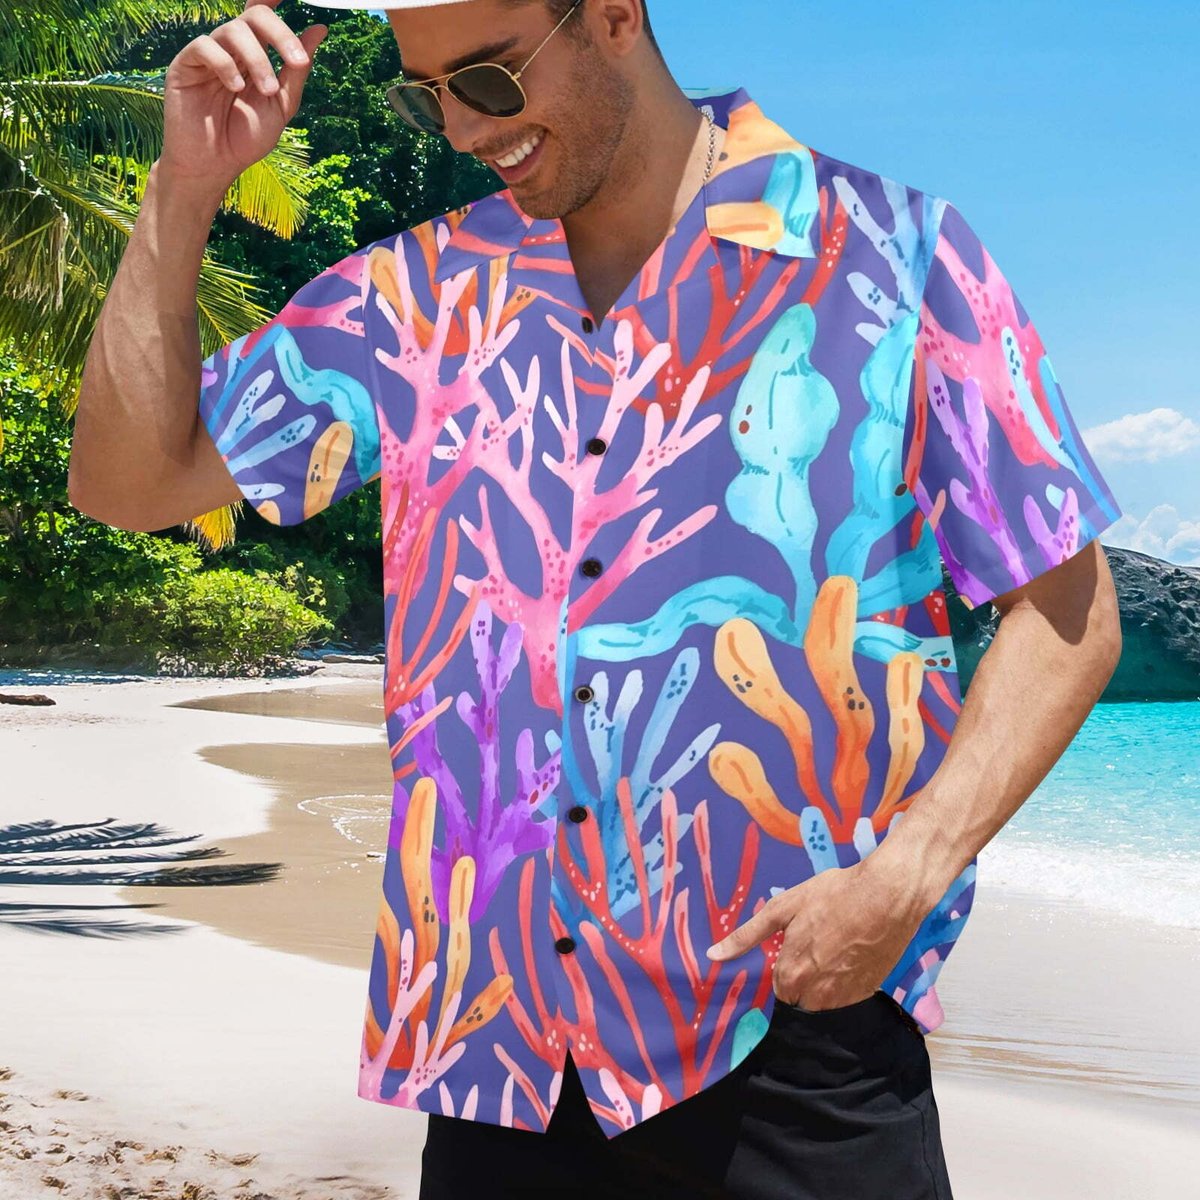 New on our site and at Walmart. 25 different designs. Thanks for looking, liking, sharing and caring about #smallbiz imaginariumdepot.us/WM-Mens-Hawaii… 
#fathersdaygifts #giftsfordad #DadGifts #fathersdayideas #giftideasfordad #beachwear #hawaiianshirt  #beachvibes #alohalife #tropicalvibes